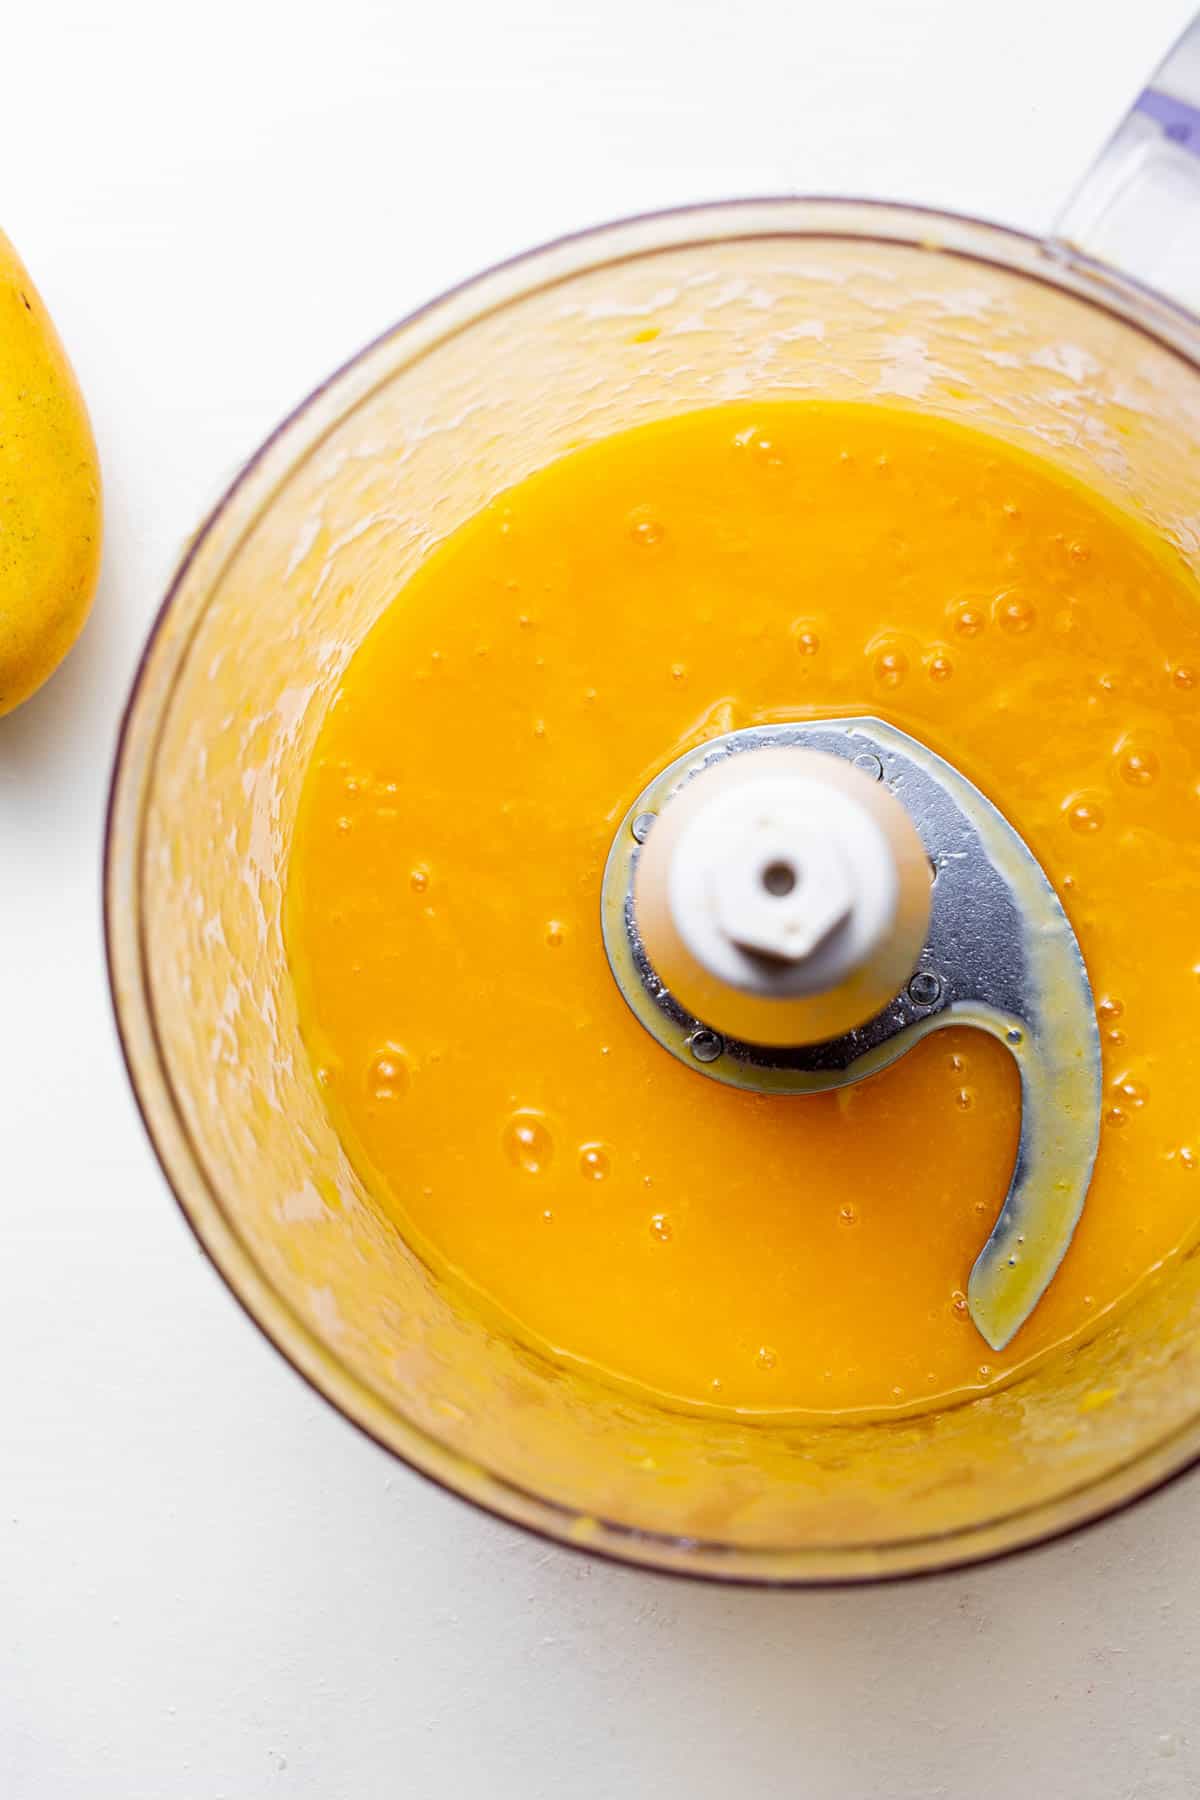 Pureed mango with other ingredients in a food processor.